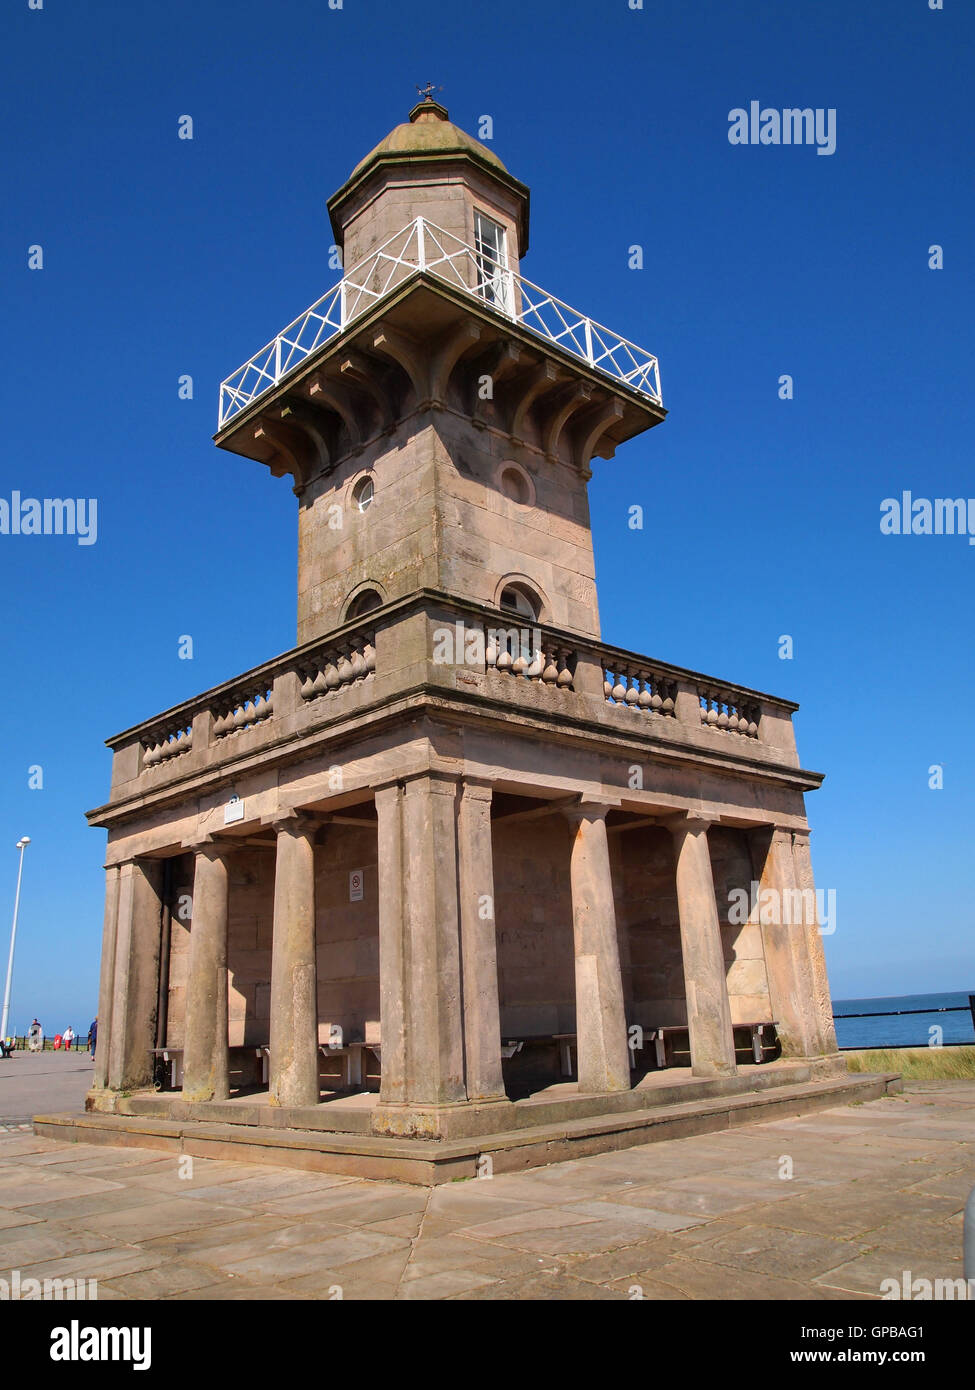 The Beach Lighthouse, built in 1839 on the beach front in Fleetwood, near Blackpool, designed by Decimus Burton. Stock Photo